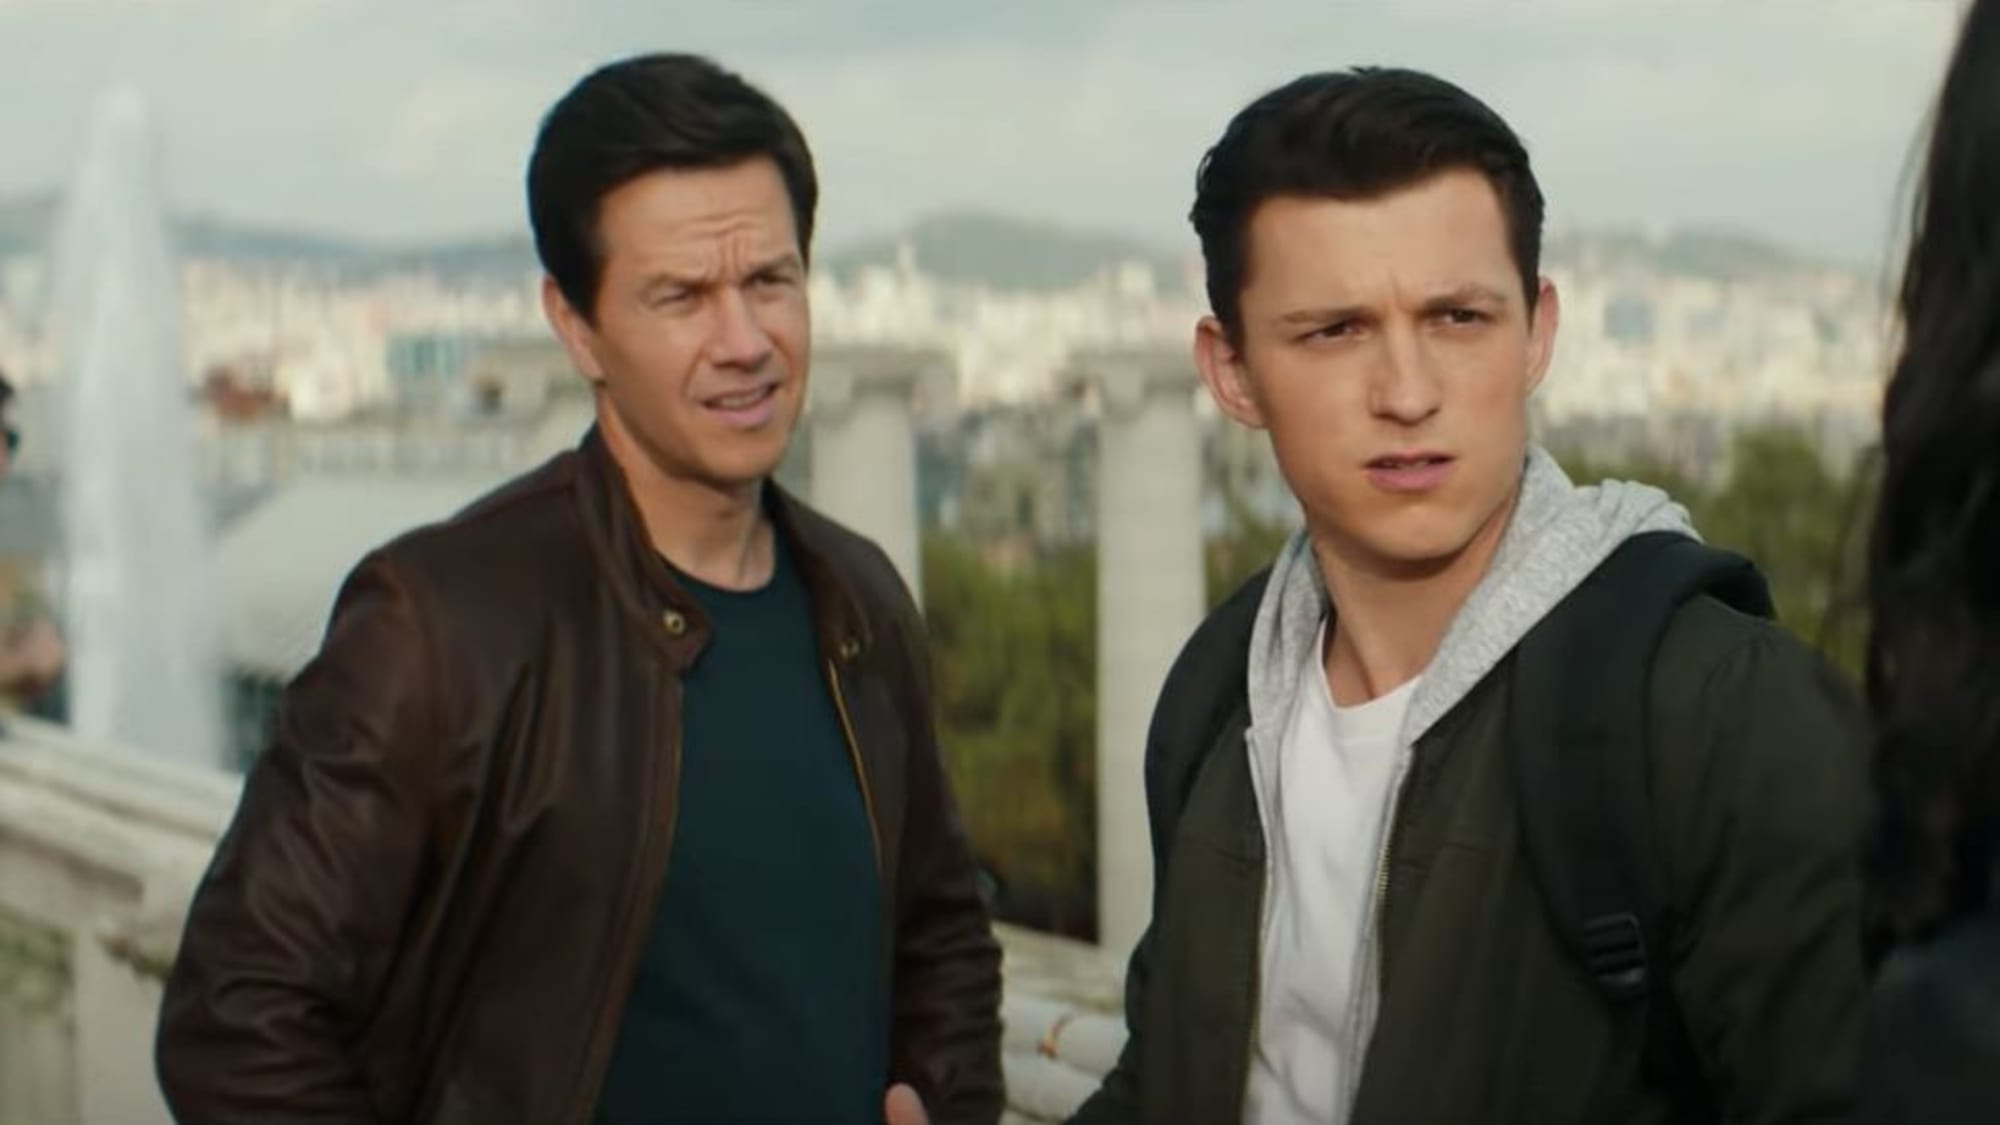 Tom Holland: Uncharted movie a Nathan Drake origin story